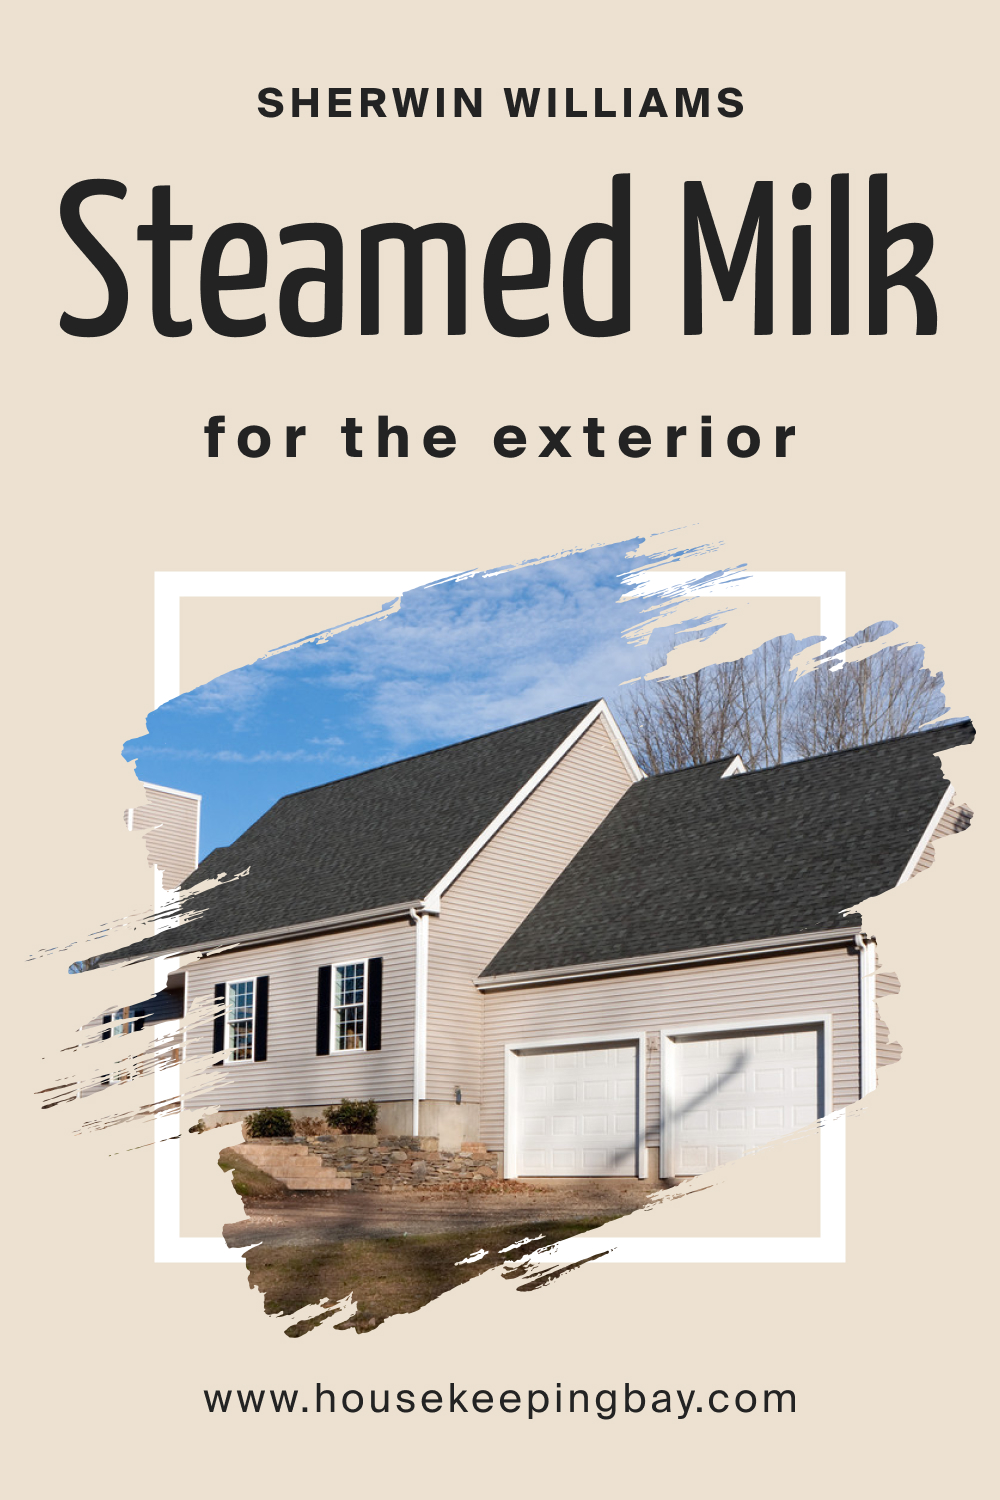 Sherwin Williams. SW Steamed Milk For the exterior